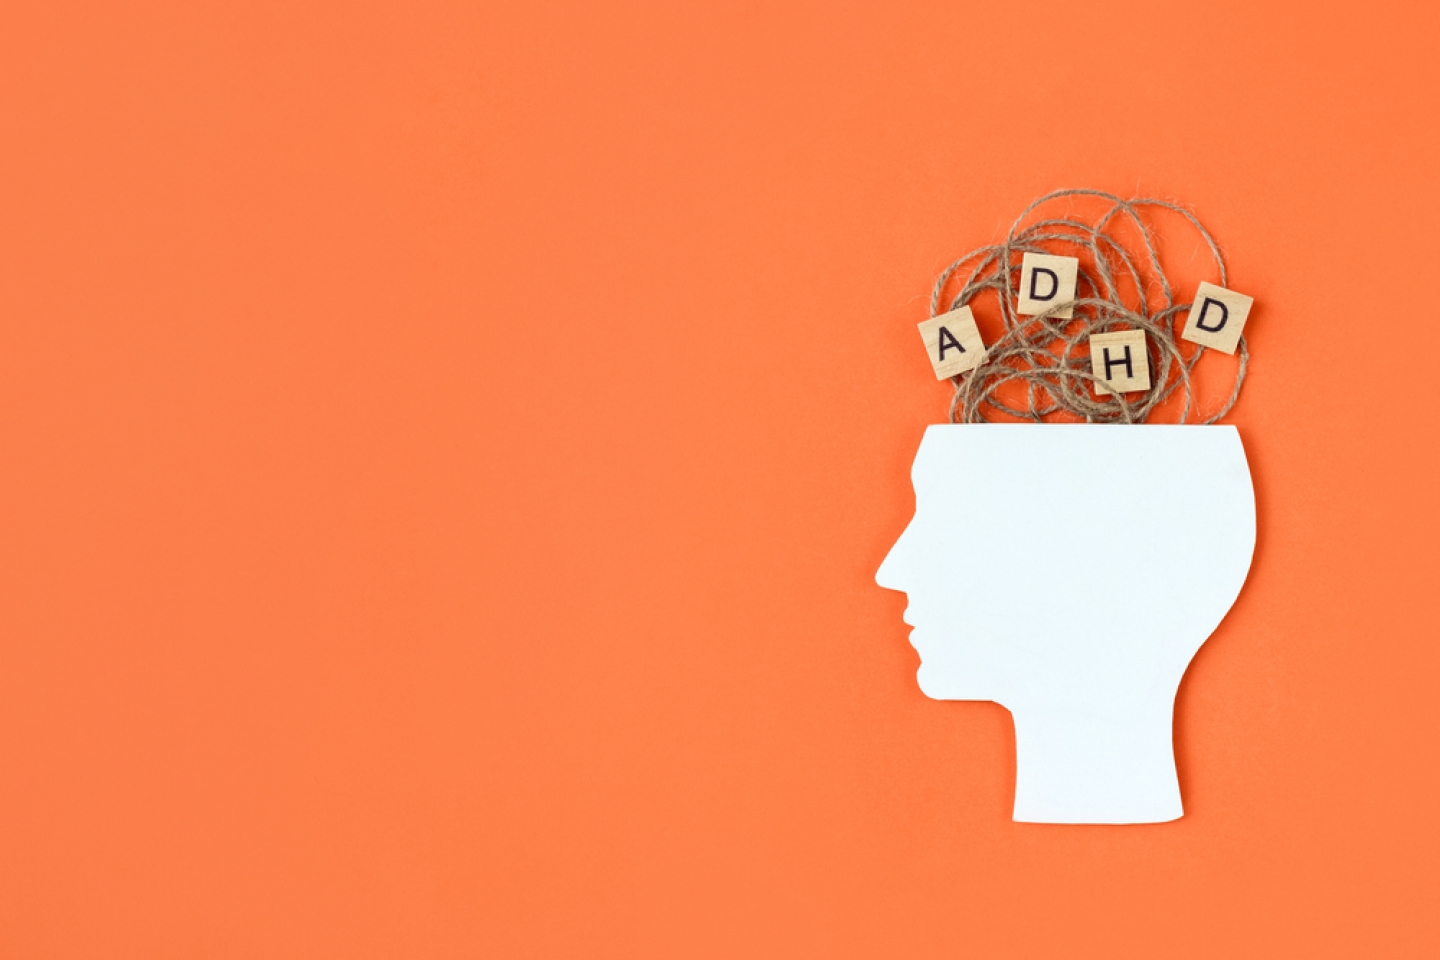 Silhouette of human head and wooden blocks with the letters ADHD on orange background.